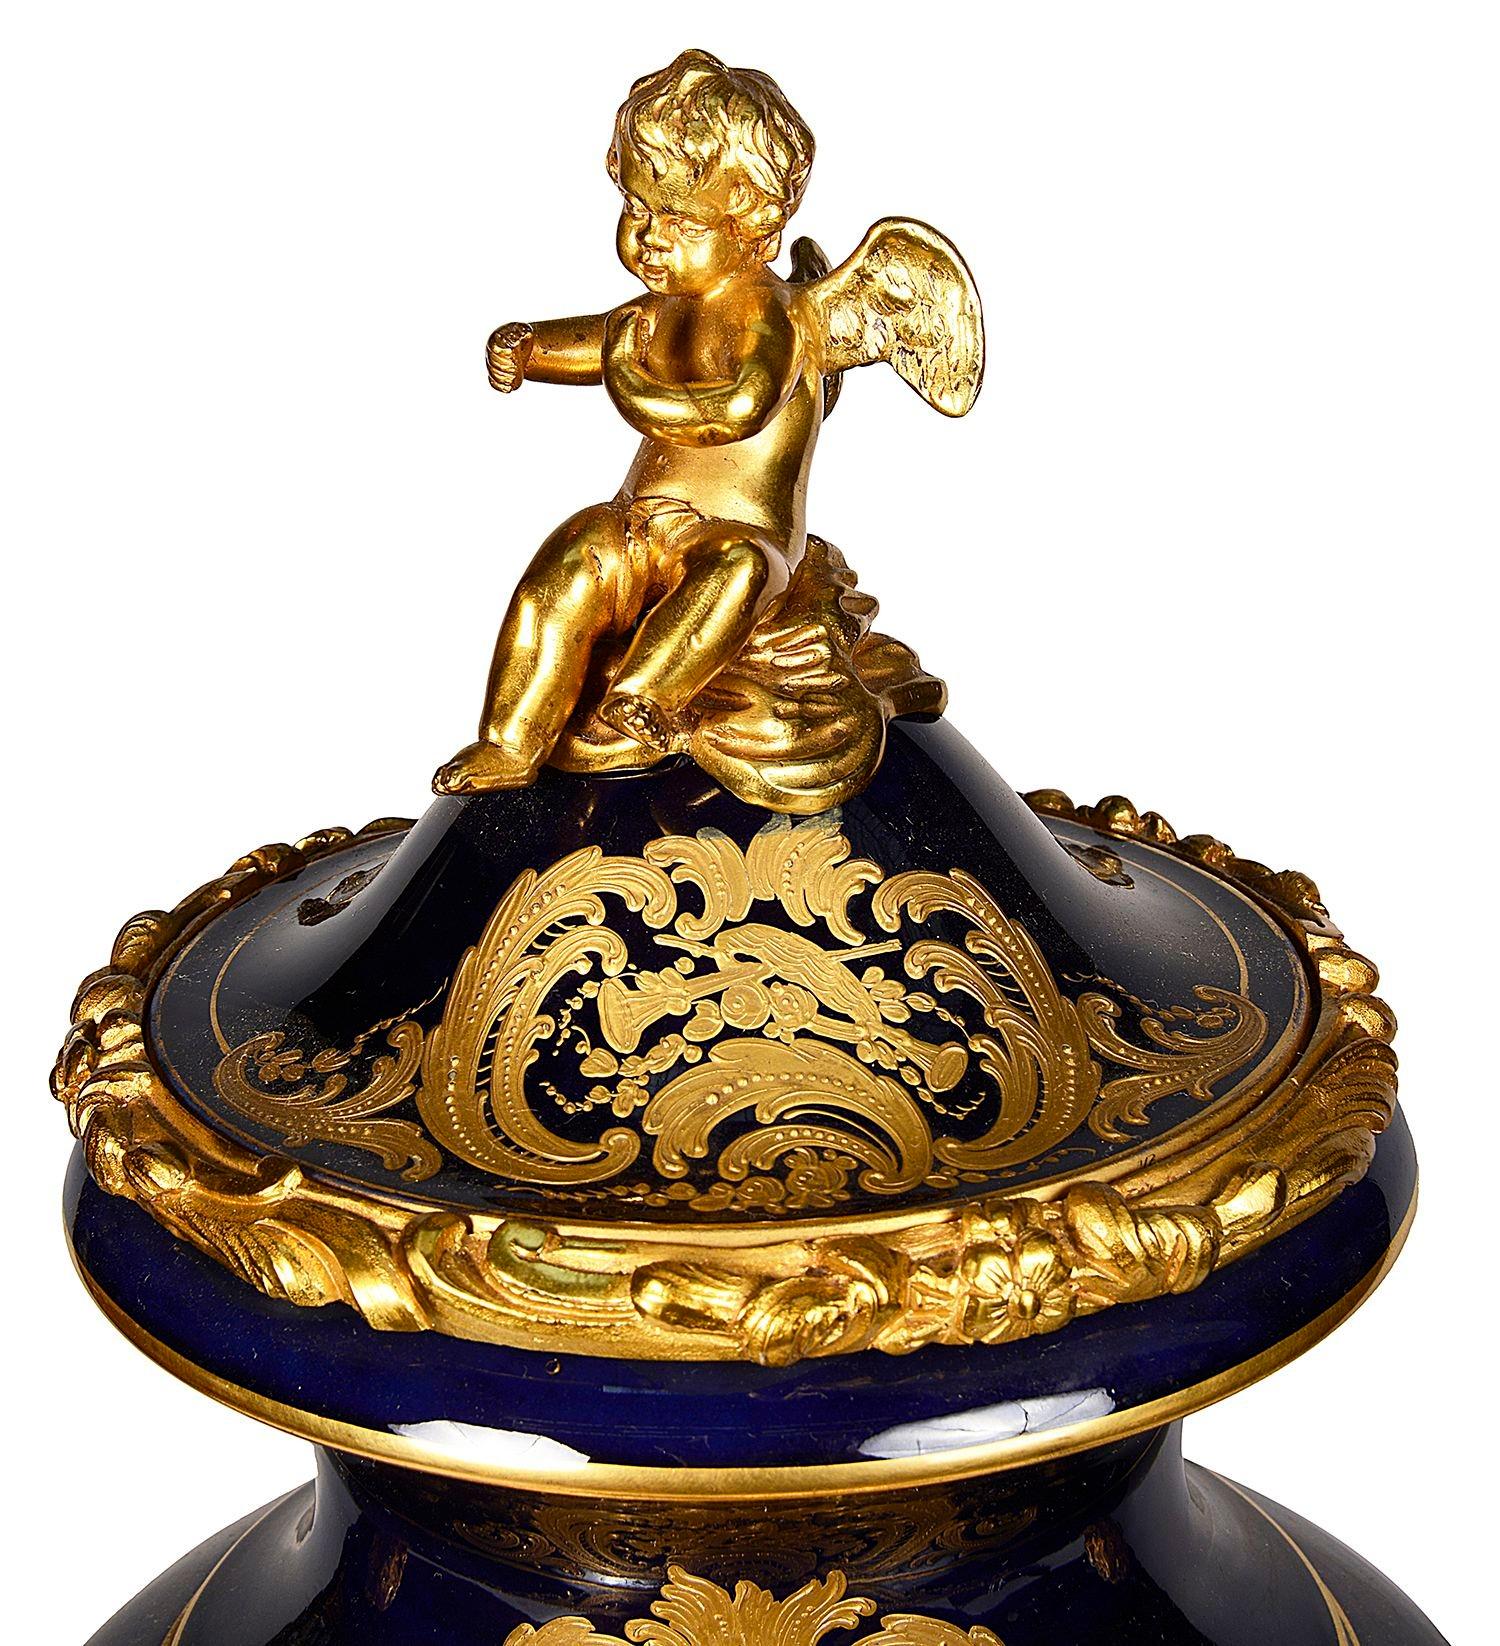 A very good quality late 19th Century French Sevres style porcelain lidded vase / clock. Having wonderful gilded ormolu mounts, a cherub finial and monopodia handles, an enamel faced eight day duration, hourly striking clock. Hand painted romantic